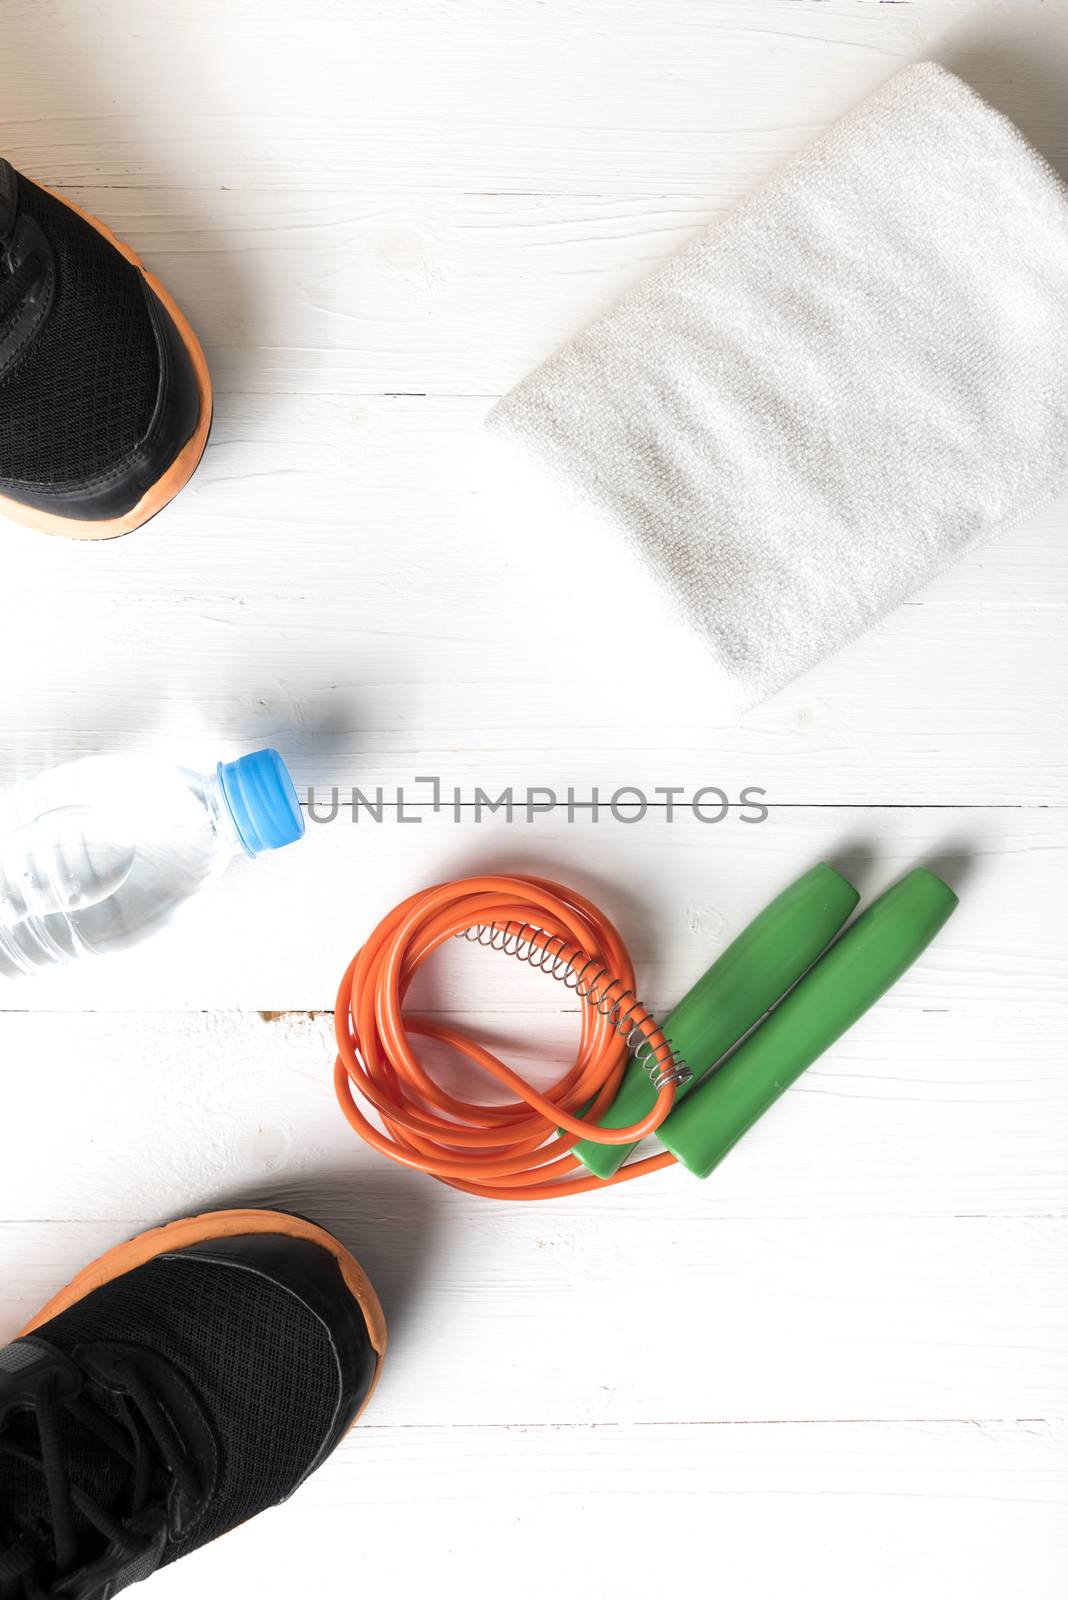 fitness equipment:running shoes,water bottle,towel,rope